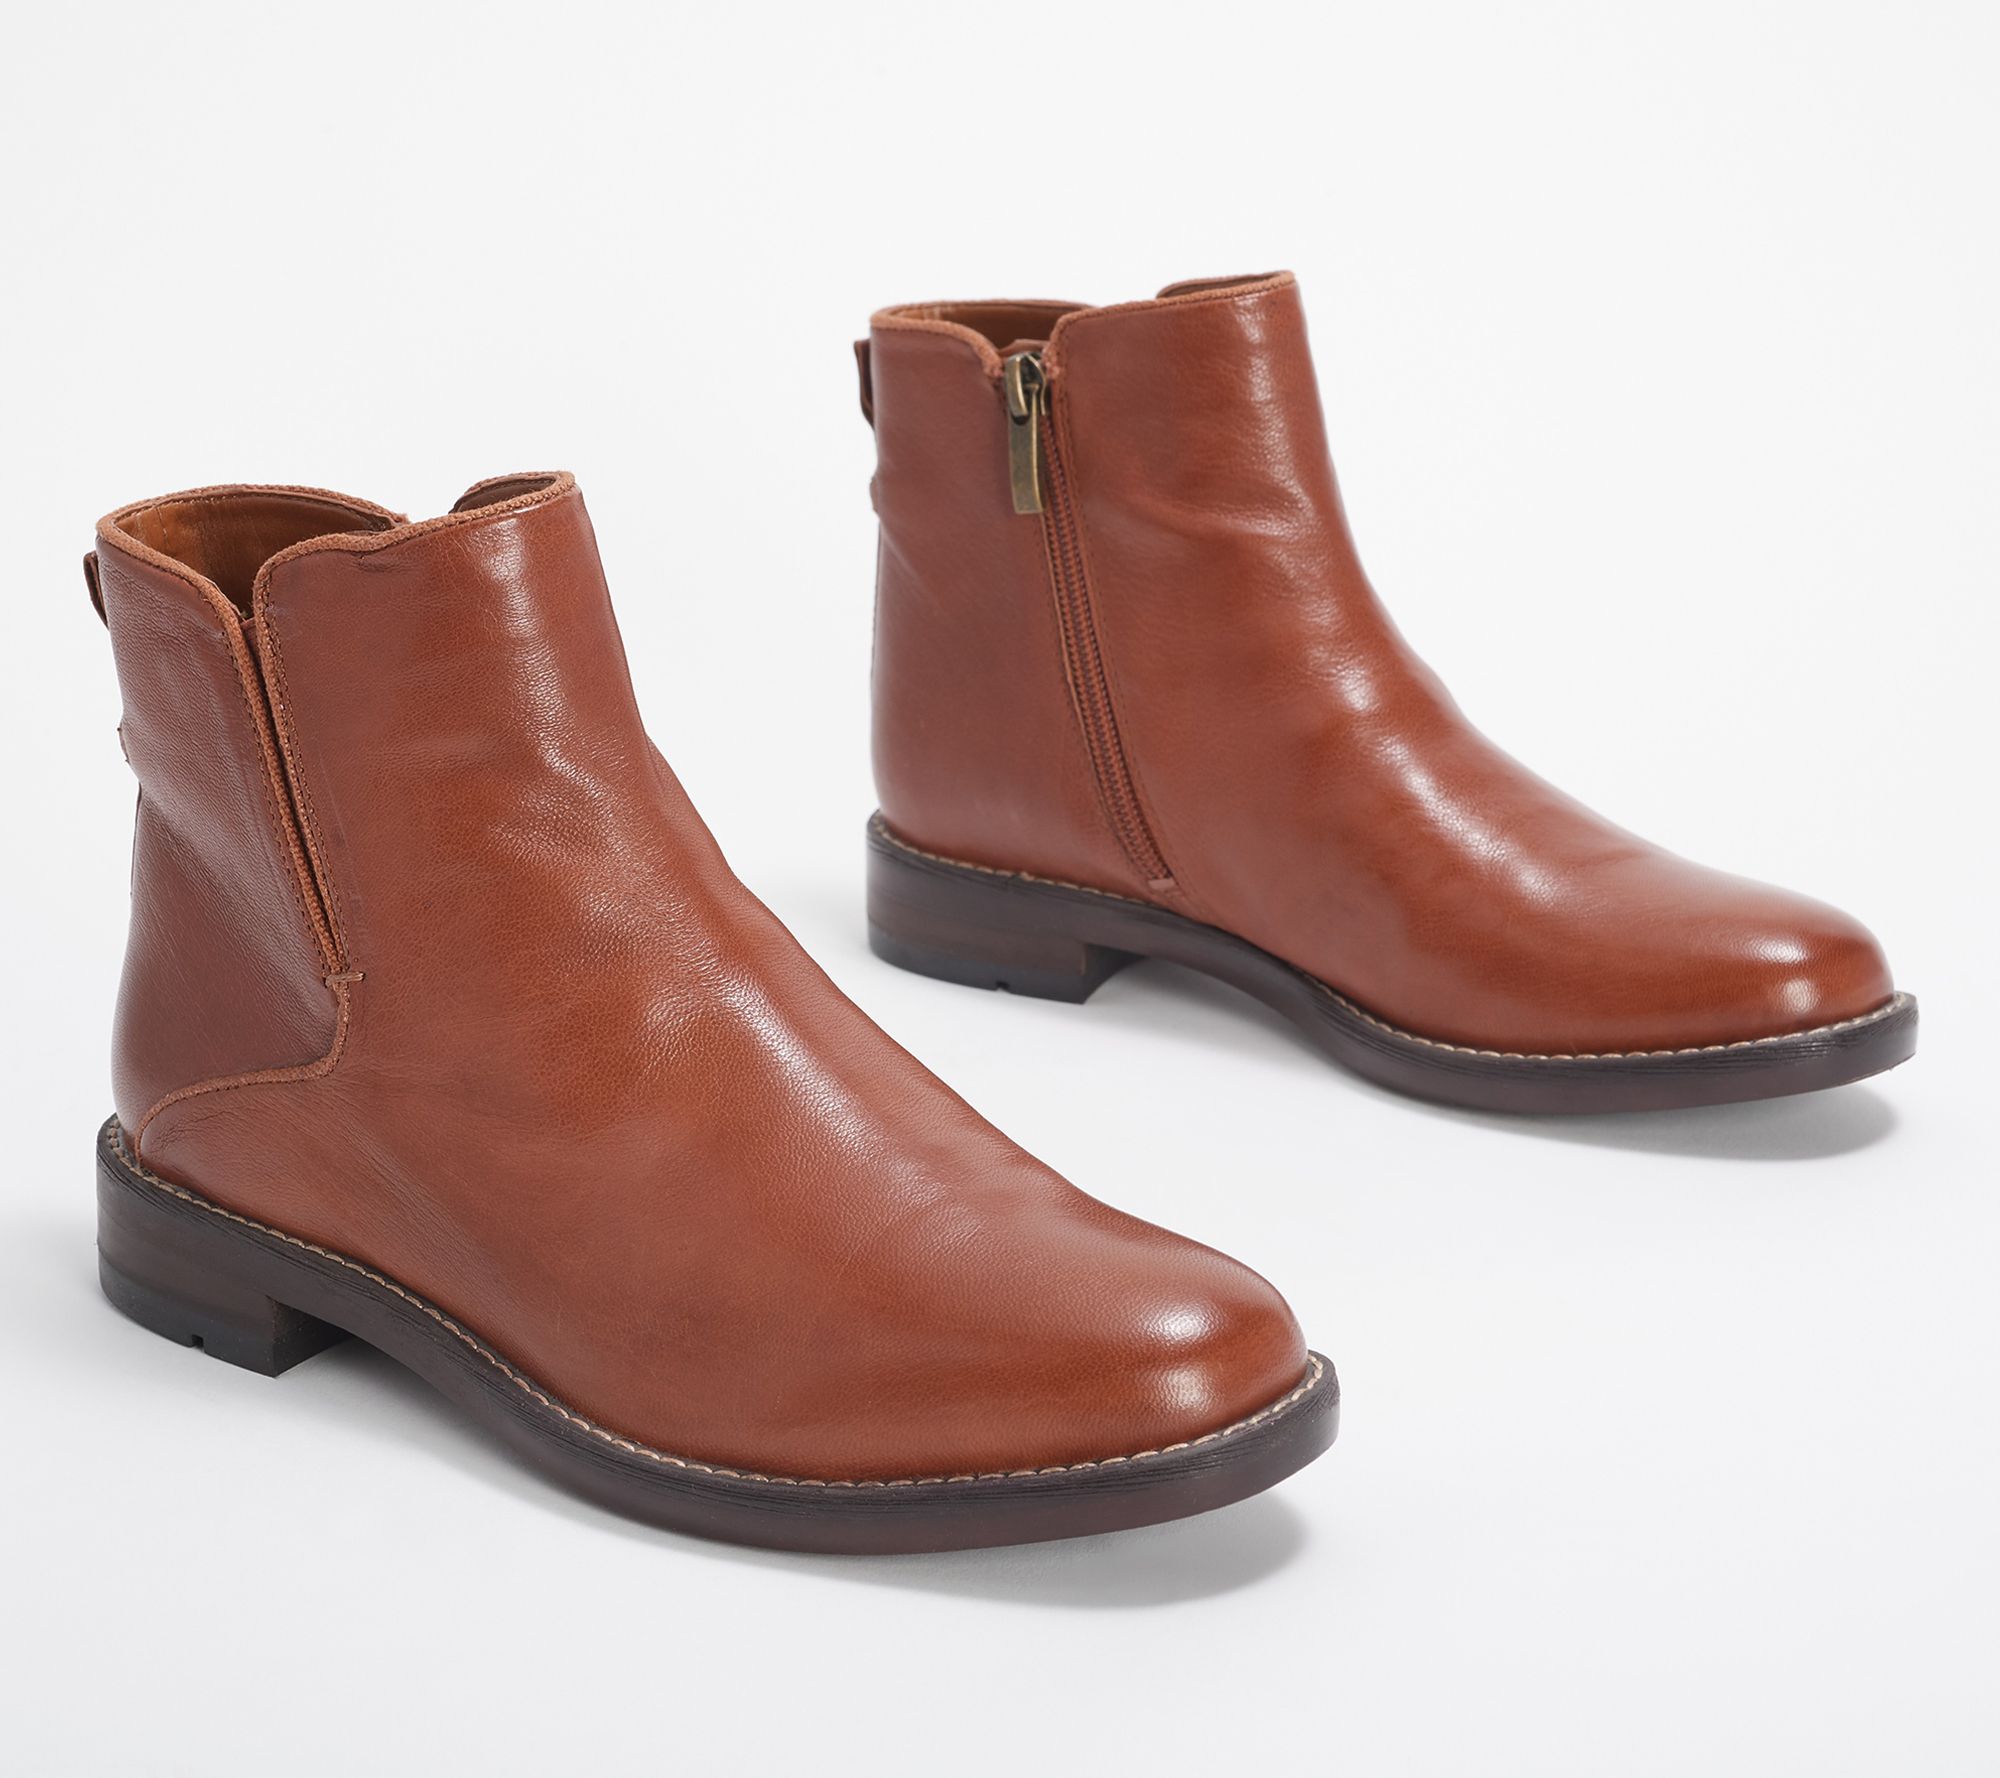 franco sarto boots ankle